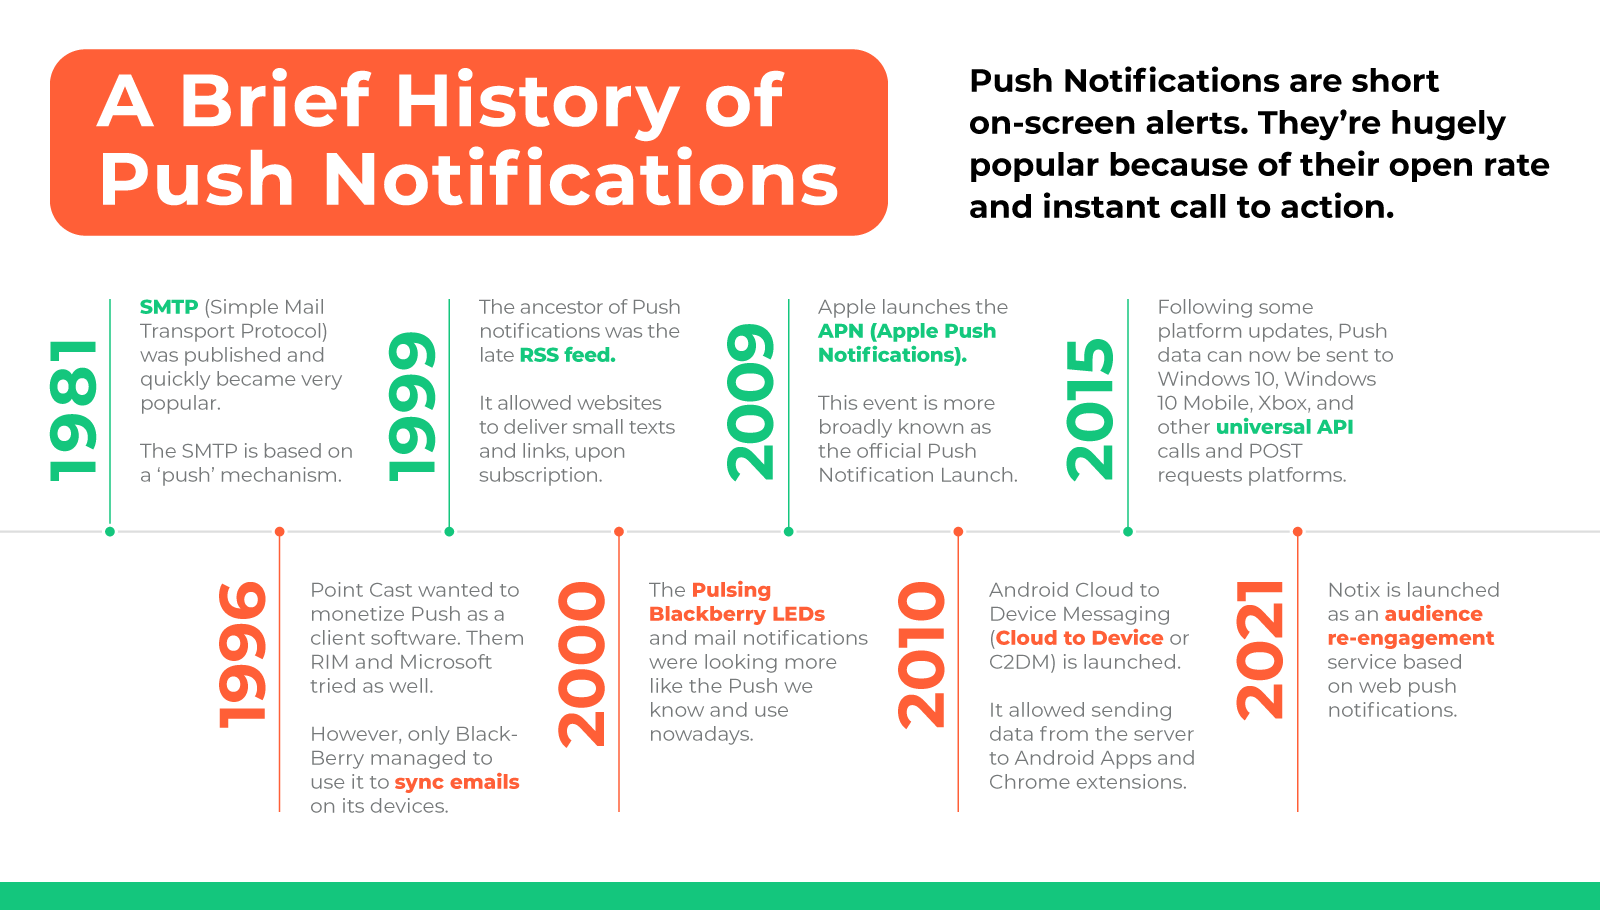 A brief history of Push Notifications